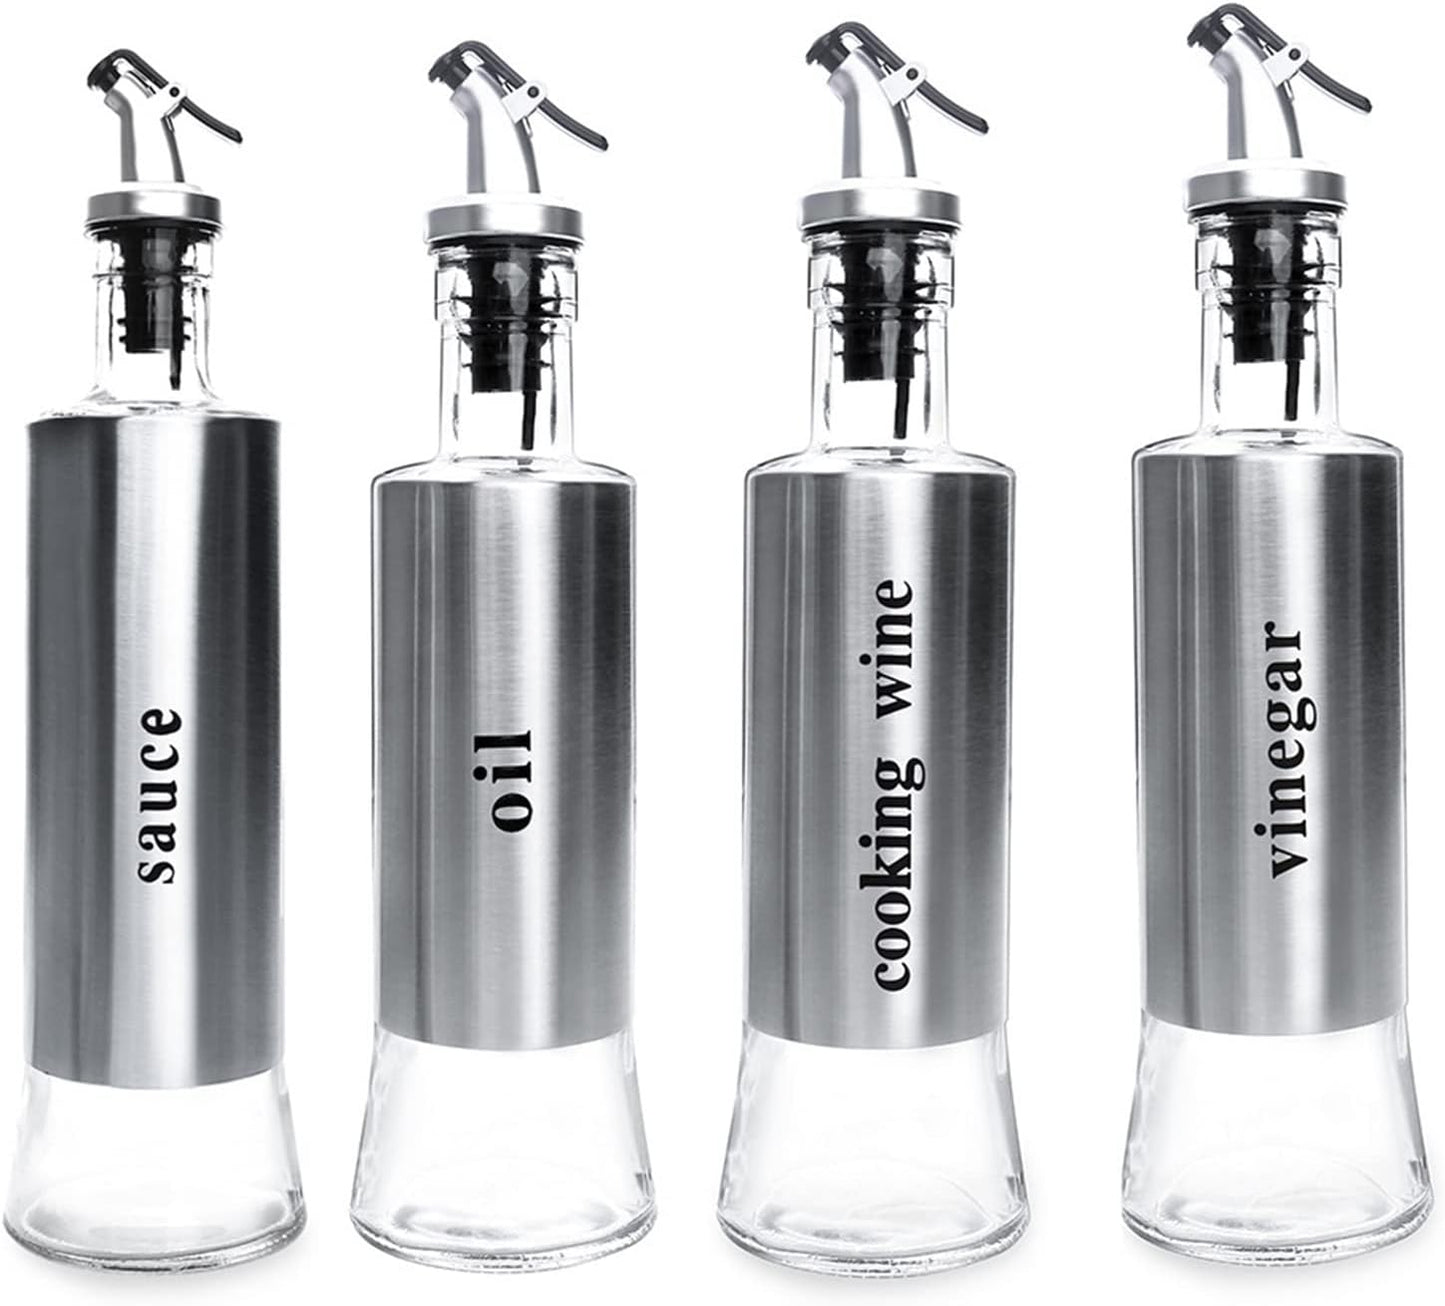 4 Piece Stainless Steel Crystal-Clear Dispensers for Olive Oil, Cooking Wine, Sauce & Vinegar (300ml)